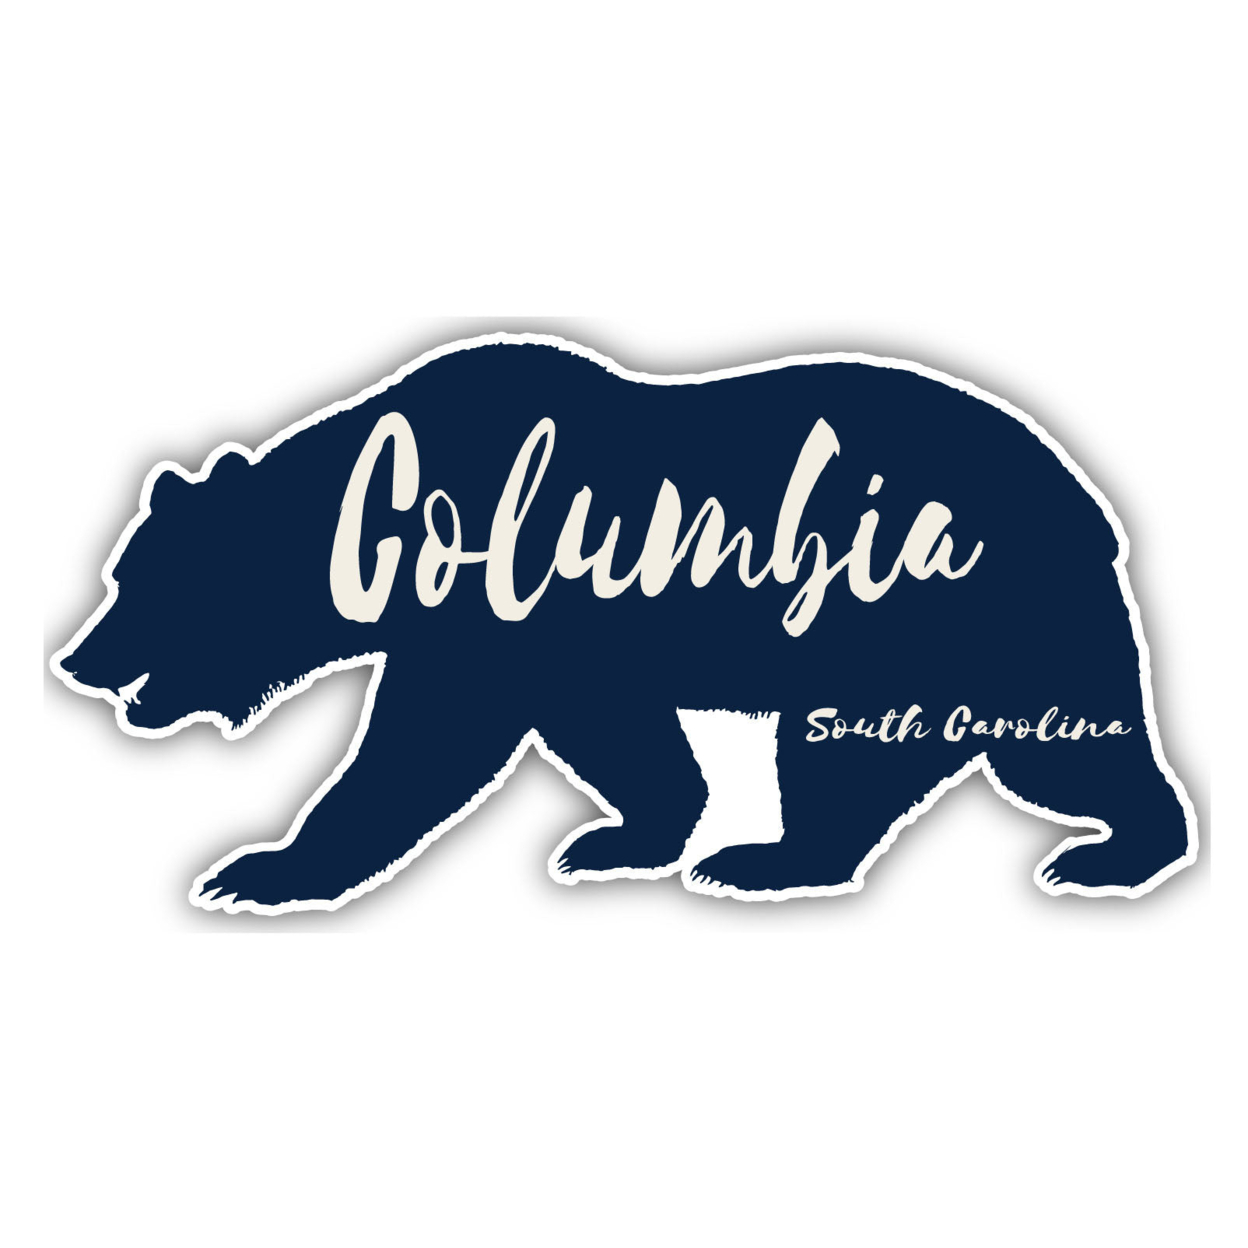 Columbia South Carolina Souvenir Decorative Stickers (Choose Theme And Size) - 4-Pack, 6-Inch, Bear